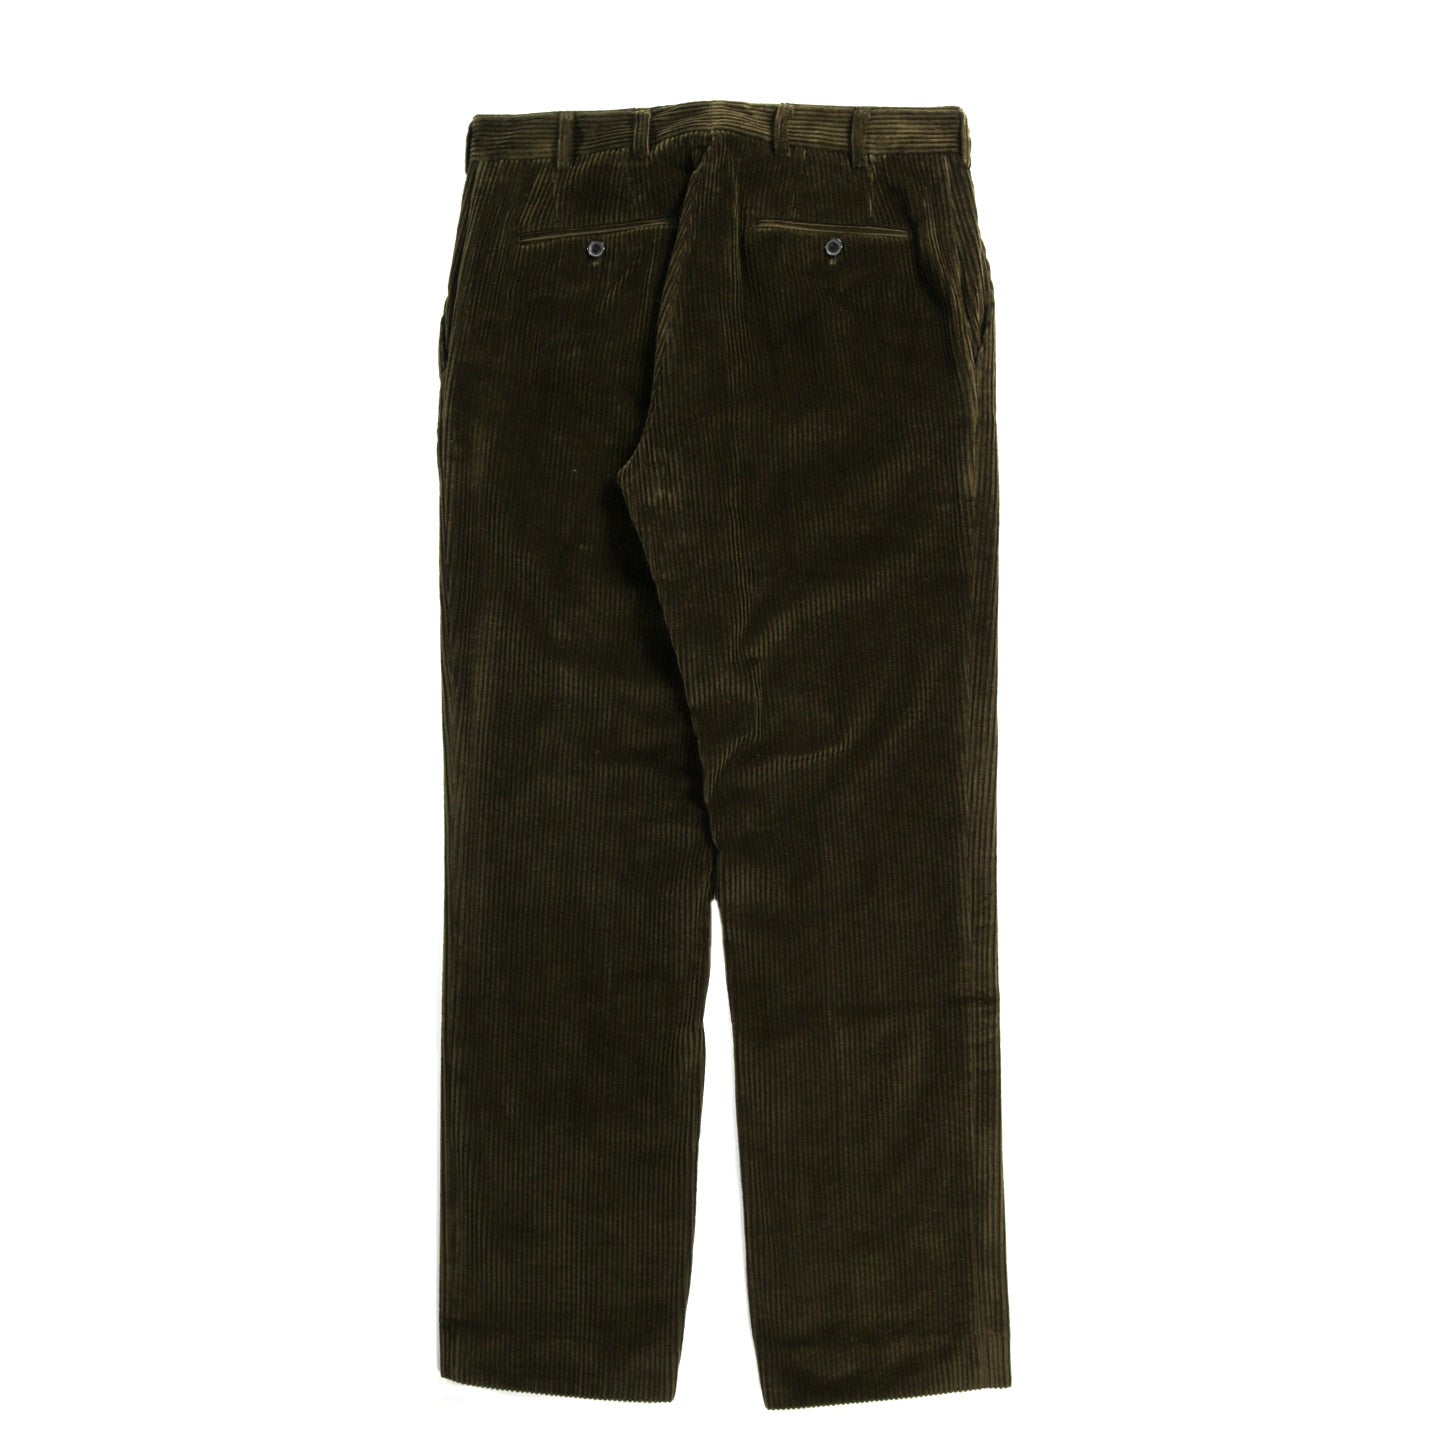 A KIND OF GUISE RELAXED TAILORED TROUSERS OLIVE CORDUROY